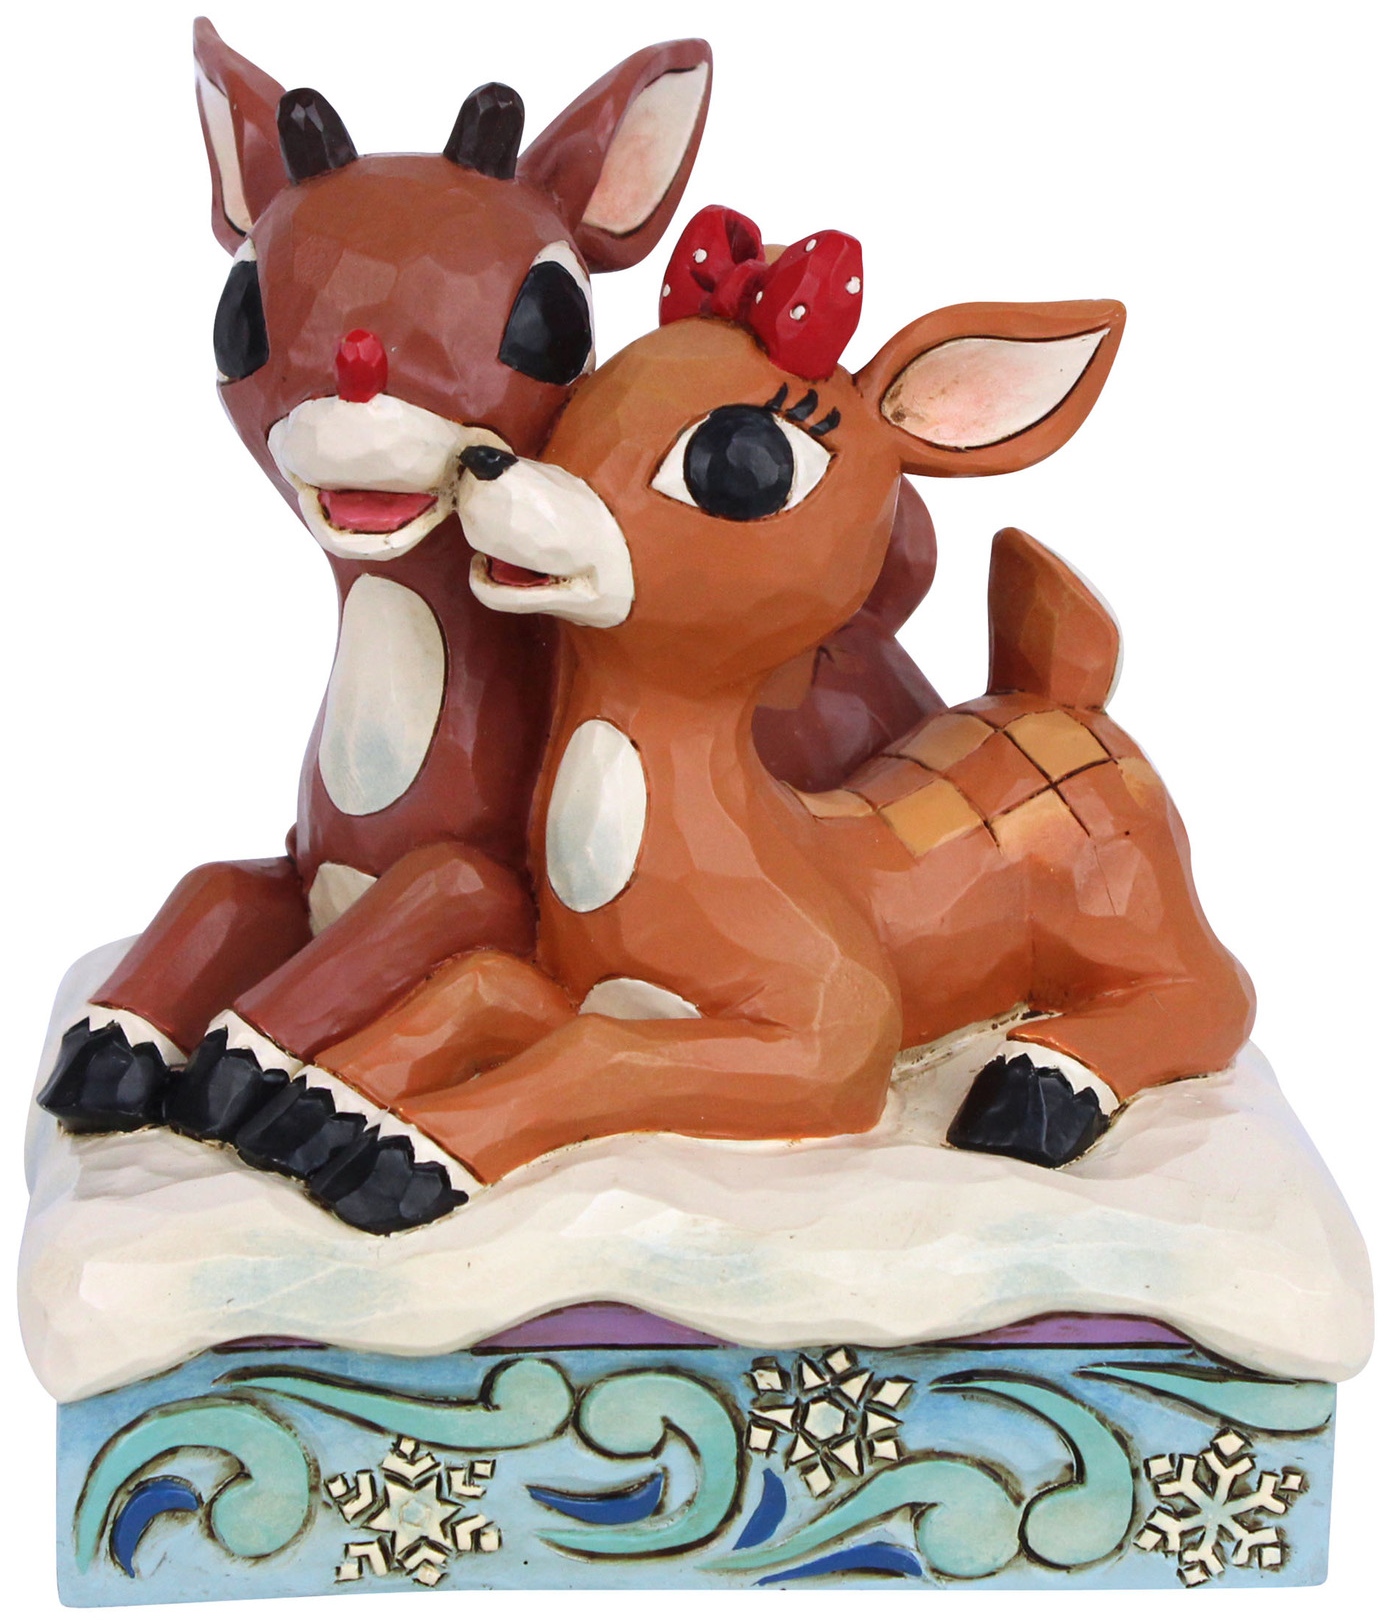 Rudolph Traditions by Jim Shore 6006790 Rudolph and Clarice Figurine